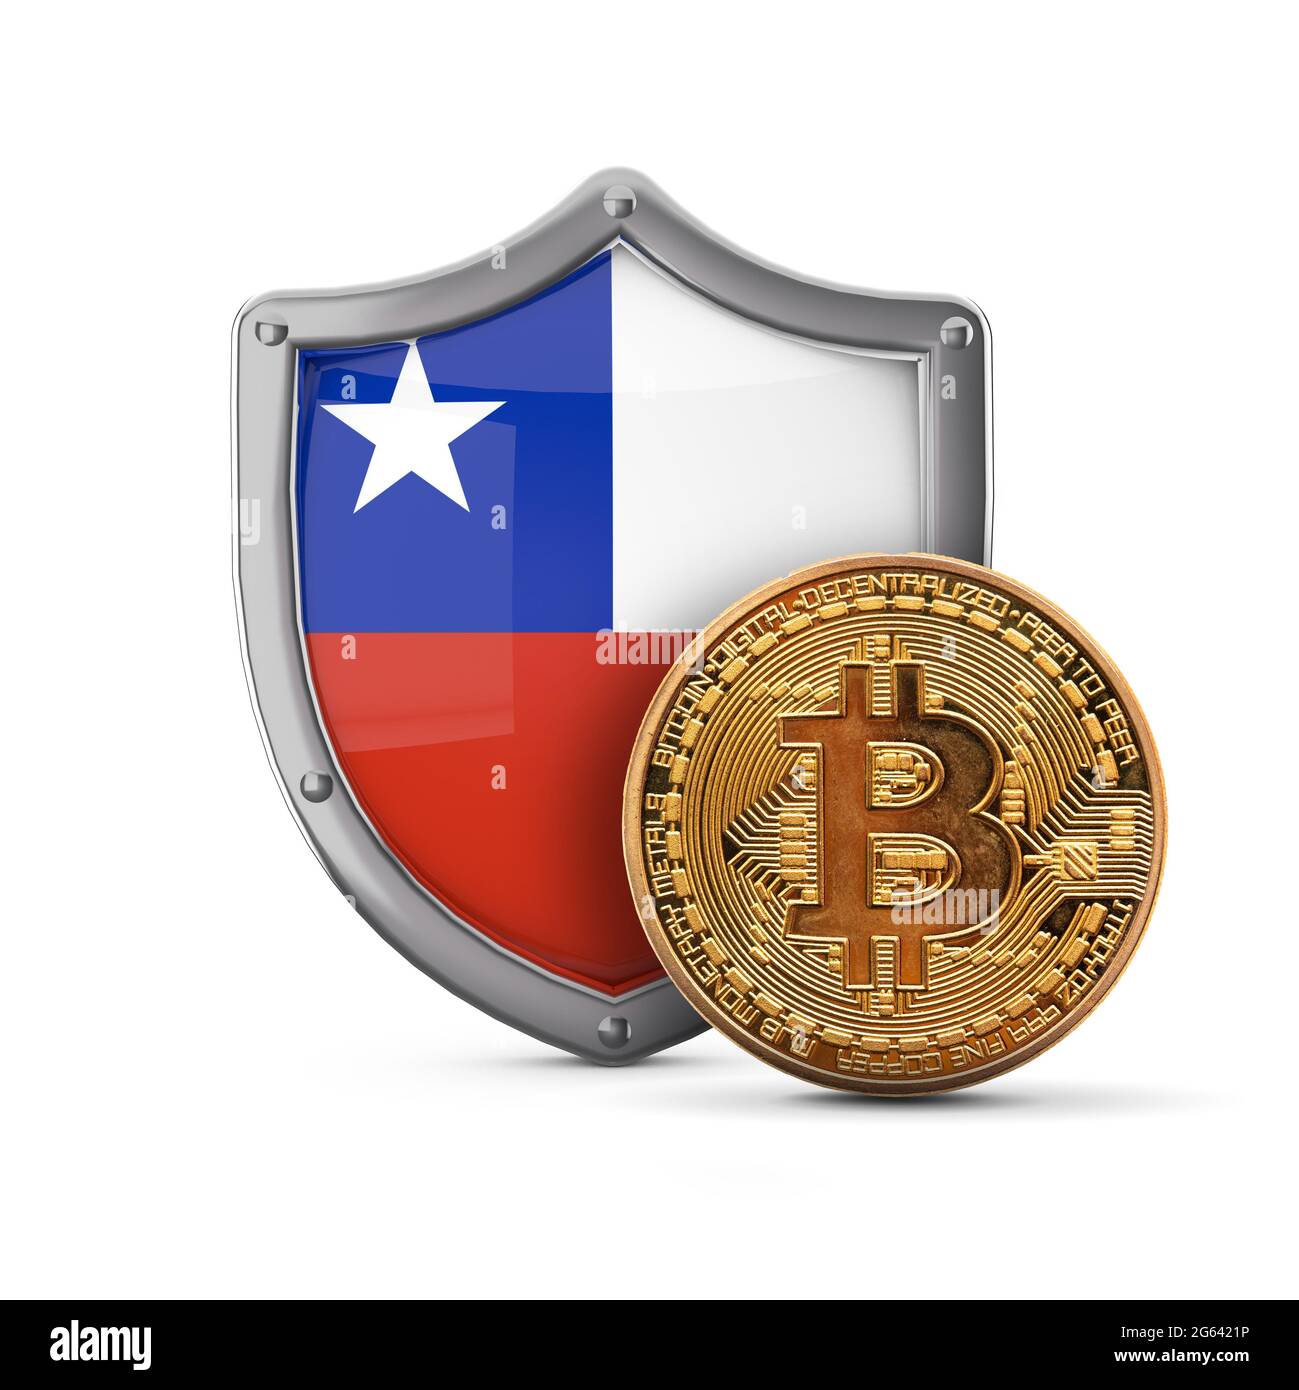 Crypto currency images from chile bitcoin mining money